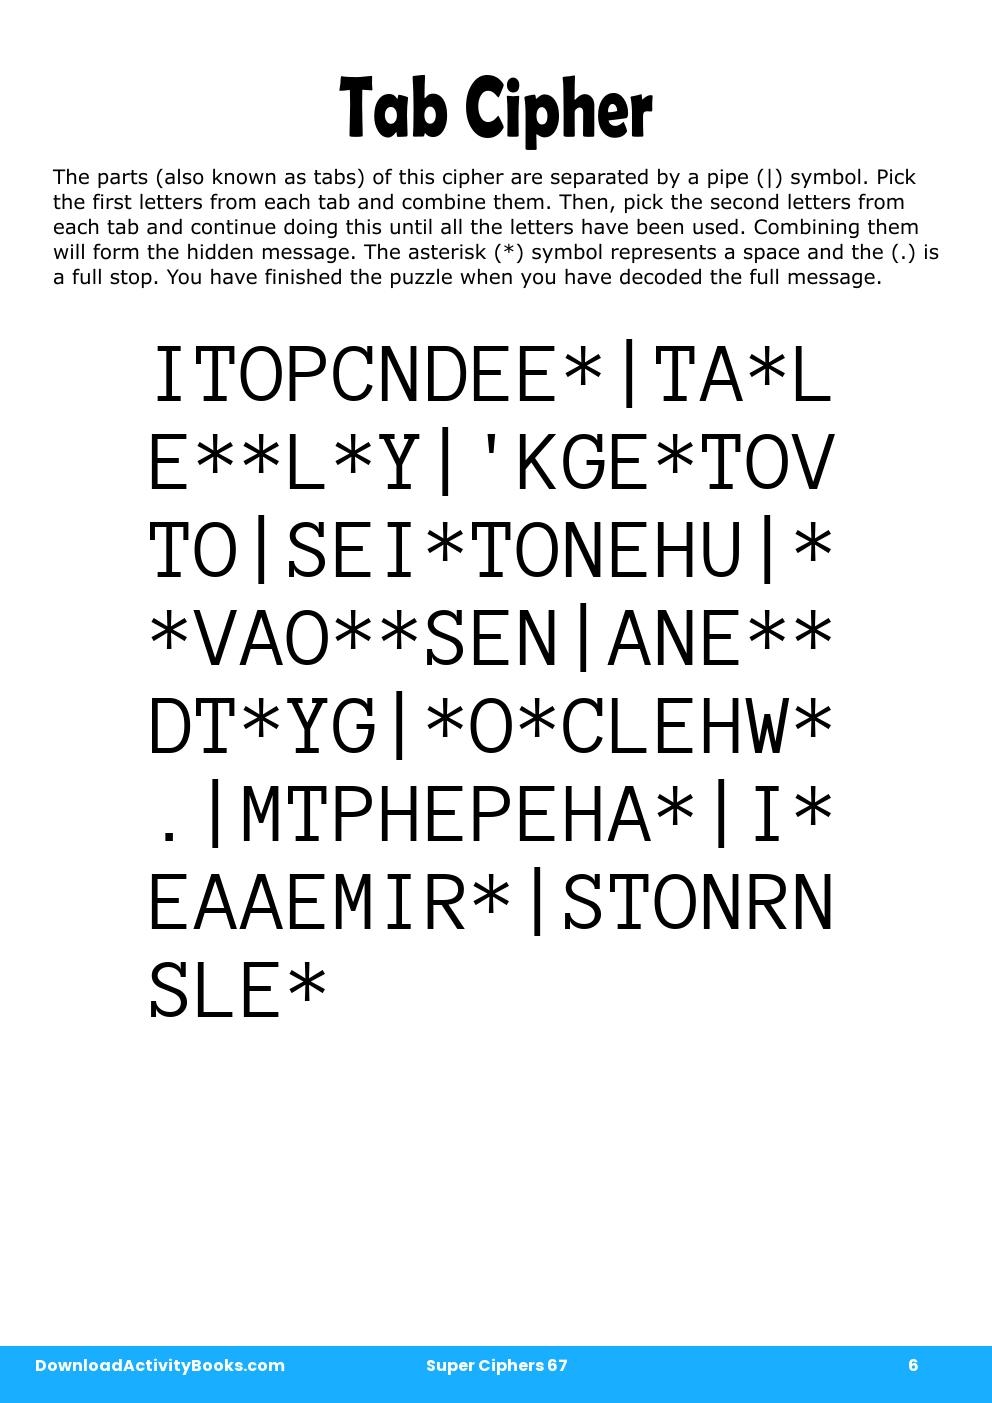 Tab Cipher in Super Ciphers 67